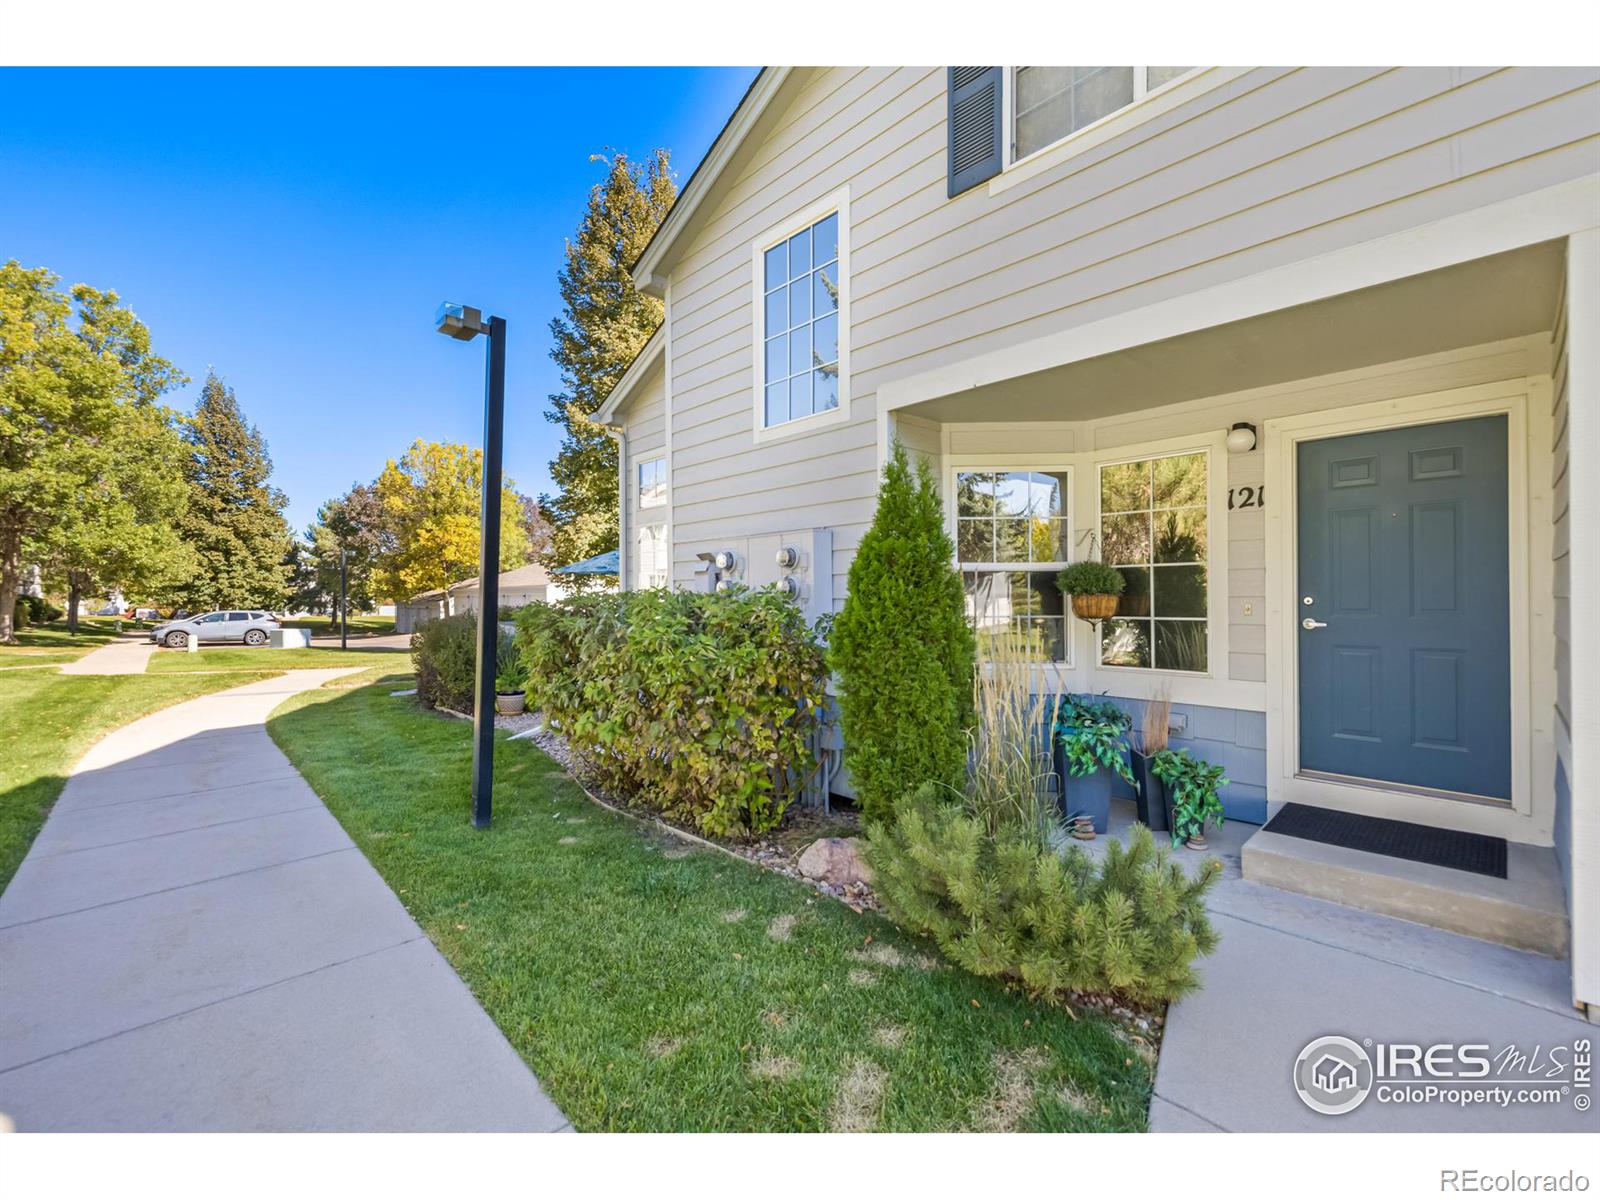 1419  RED MOUNTAIN Drive, longmont MLS: 4567891003861 Beds: 3 Baths: 3 Price: $450,000